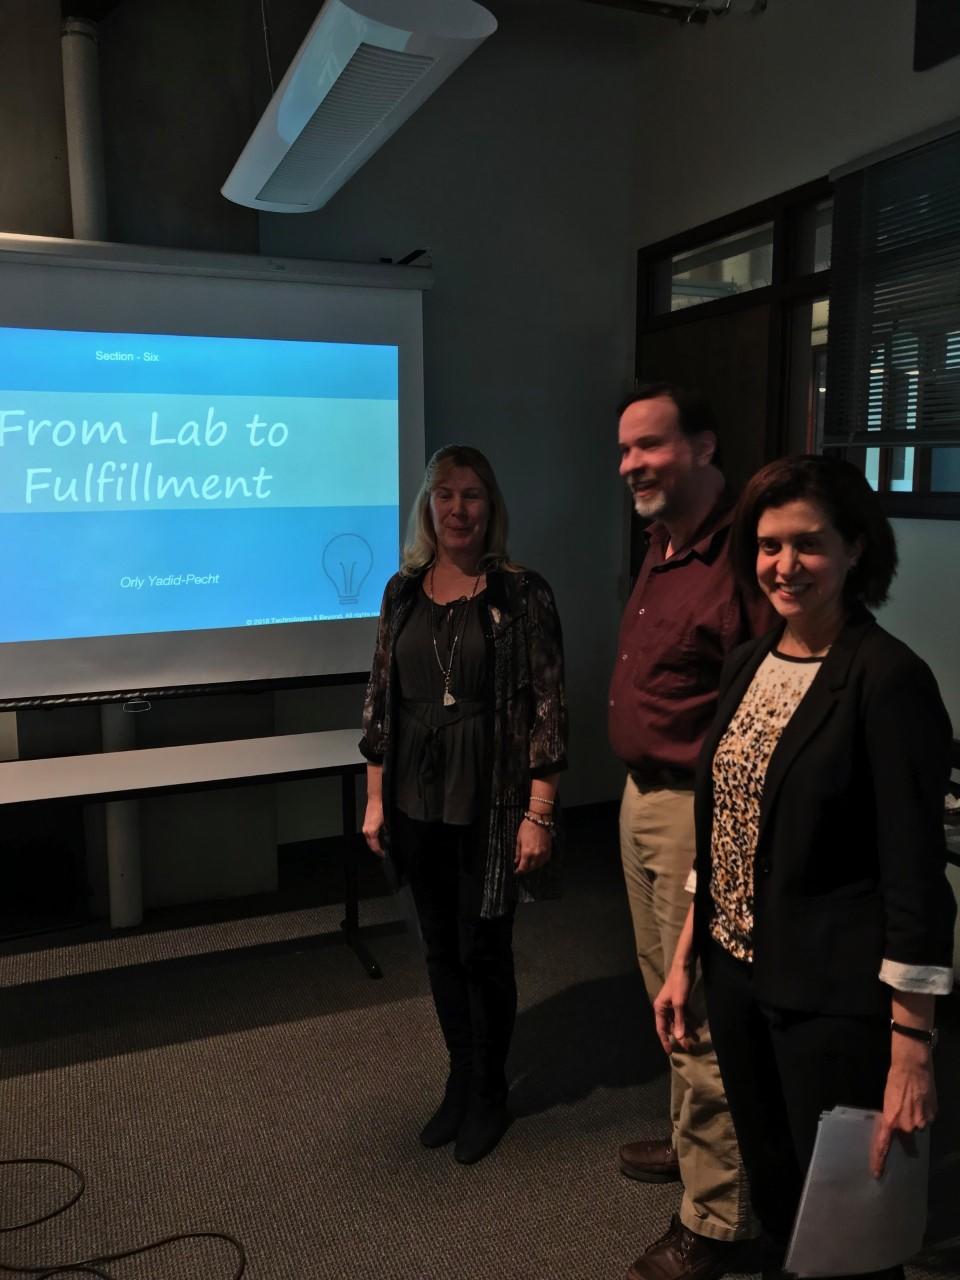 Dr. Yadid-Pecht presenting the FL2F at the UofC, with Dr. Skone (AVPR, UofC) and Dr. Westwick (DH, ENEL, UofC)